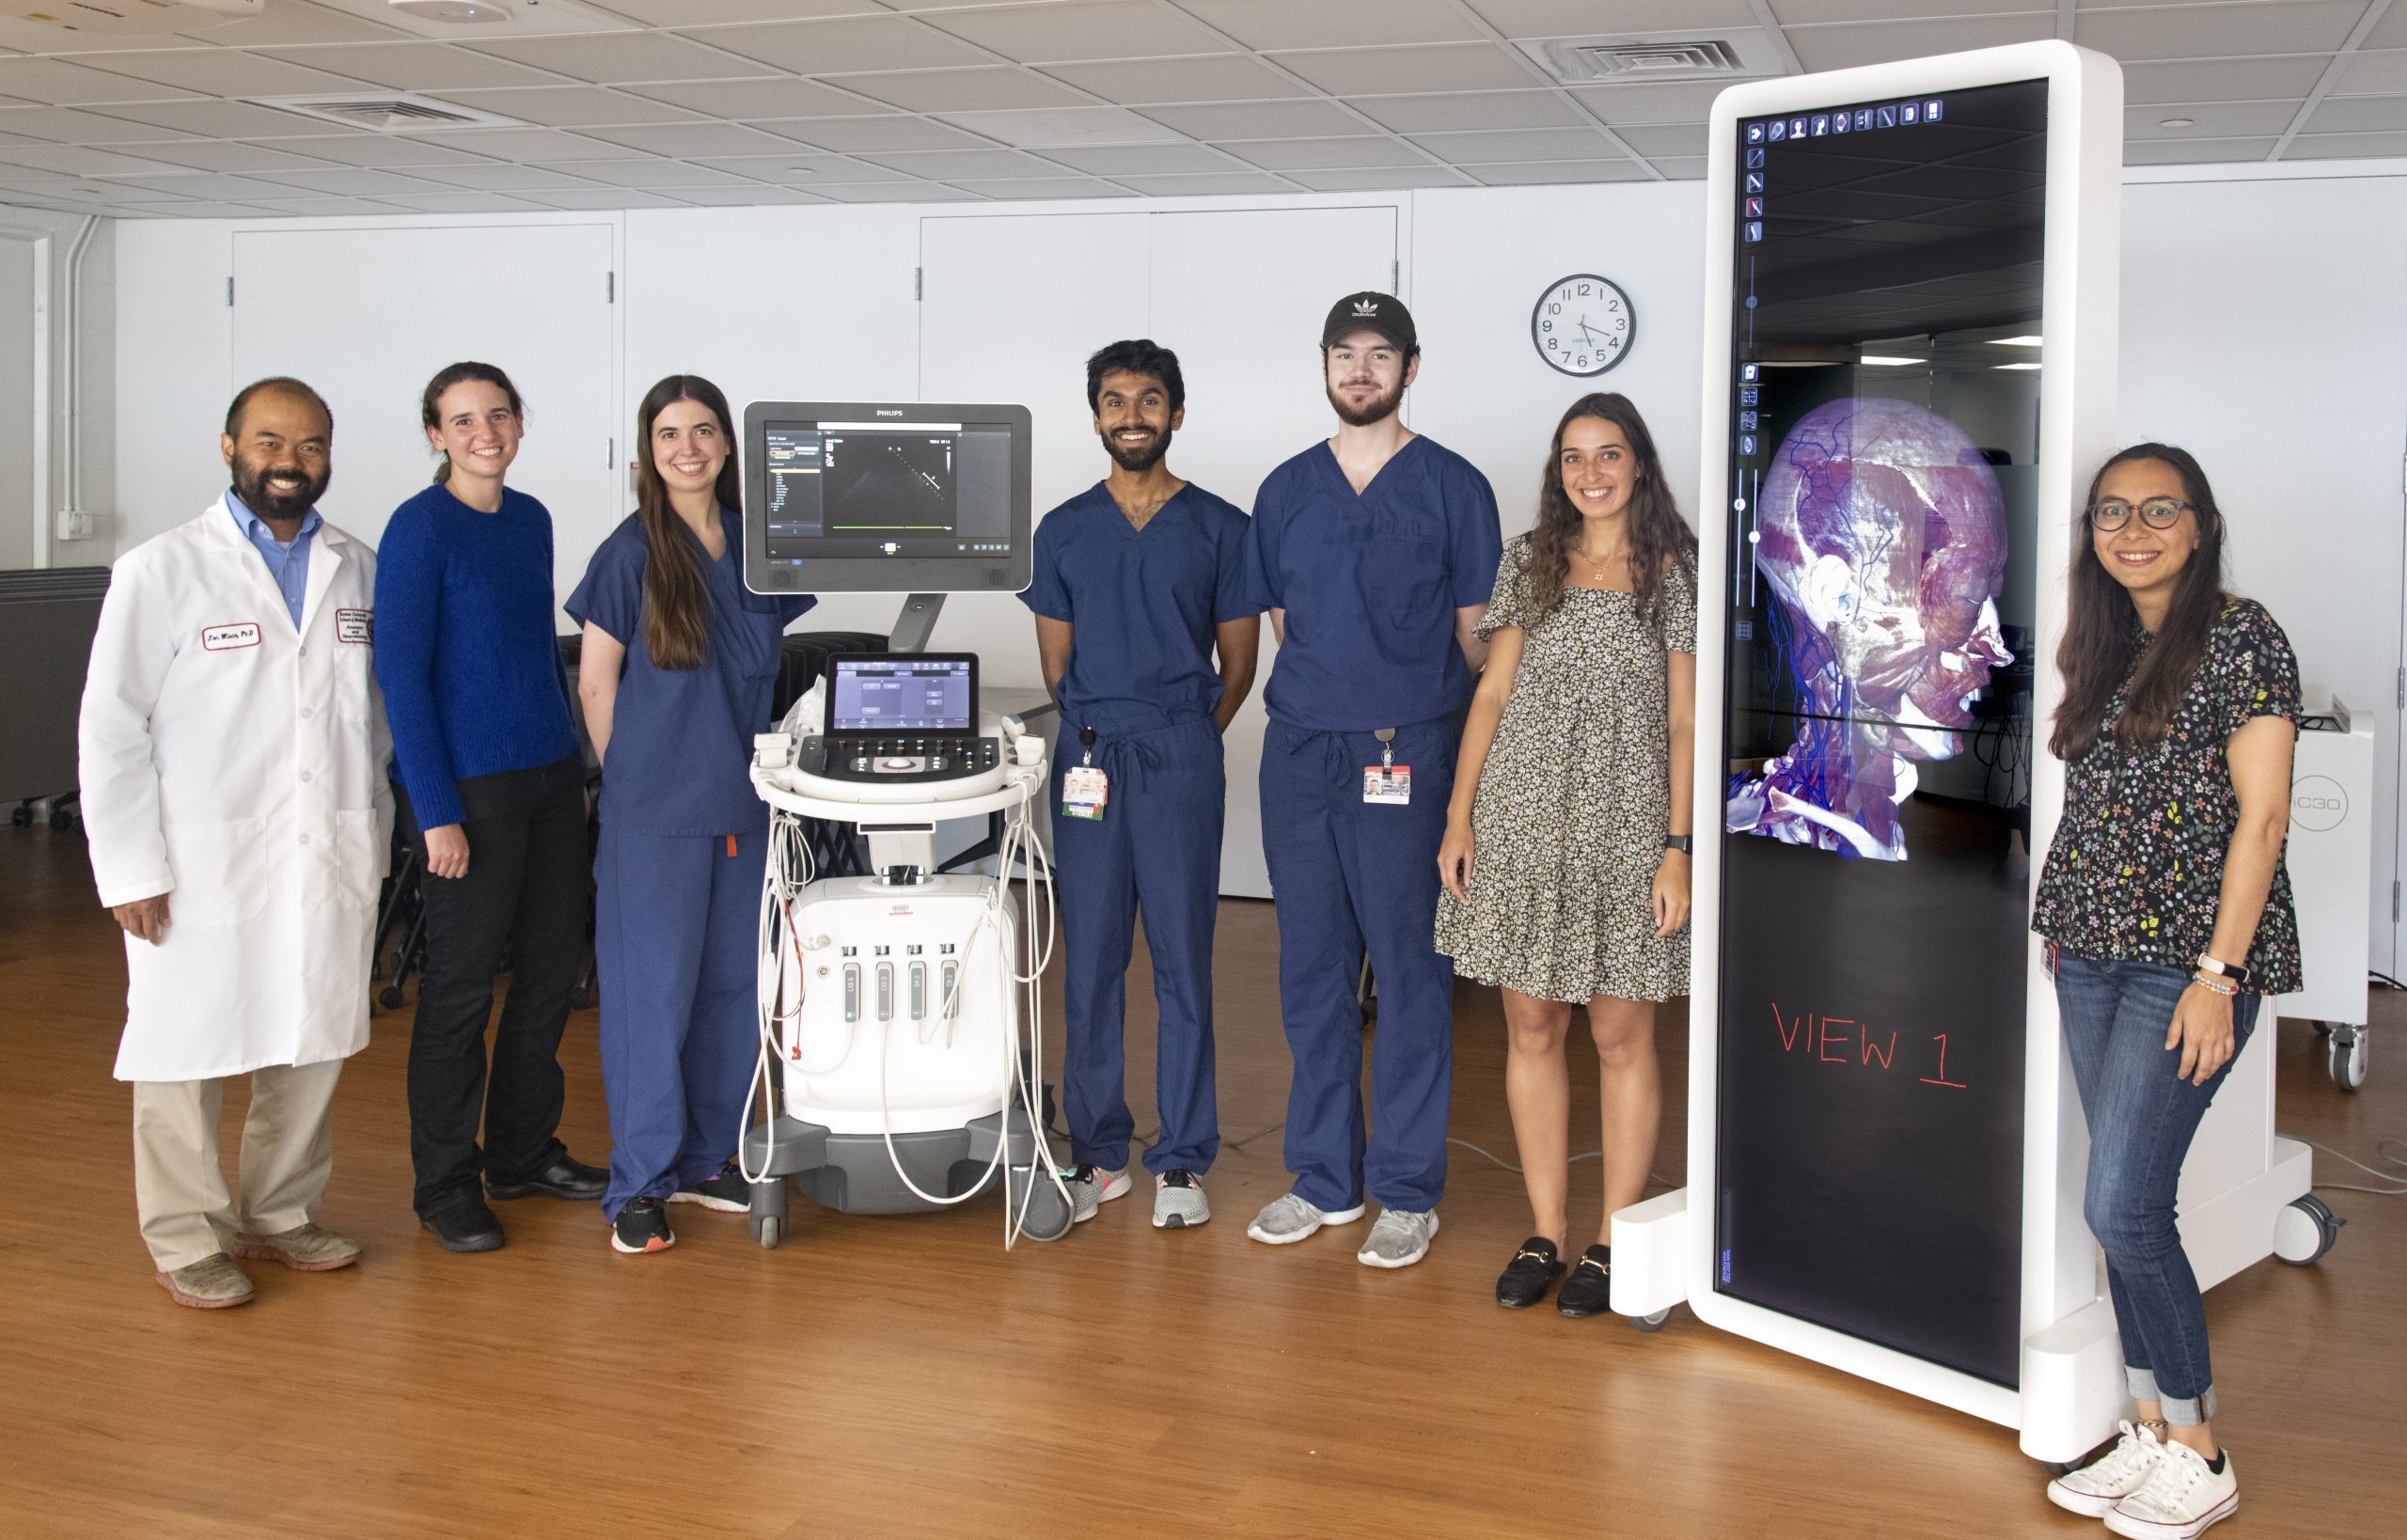 Seven faculty, staff and students stand next to the Anatomage and ultrasound machines.